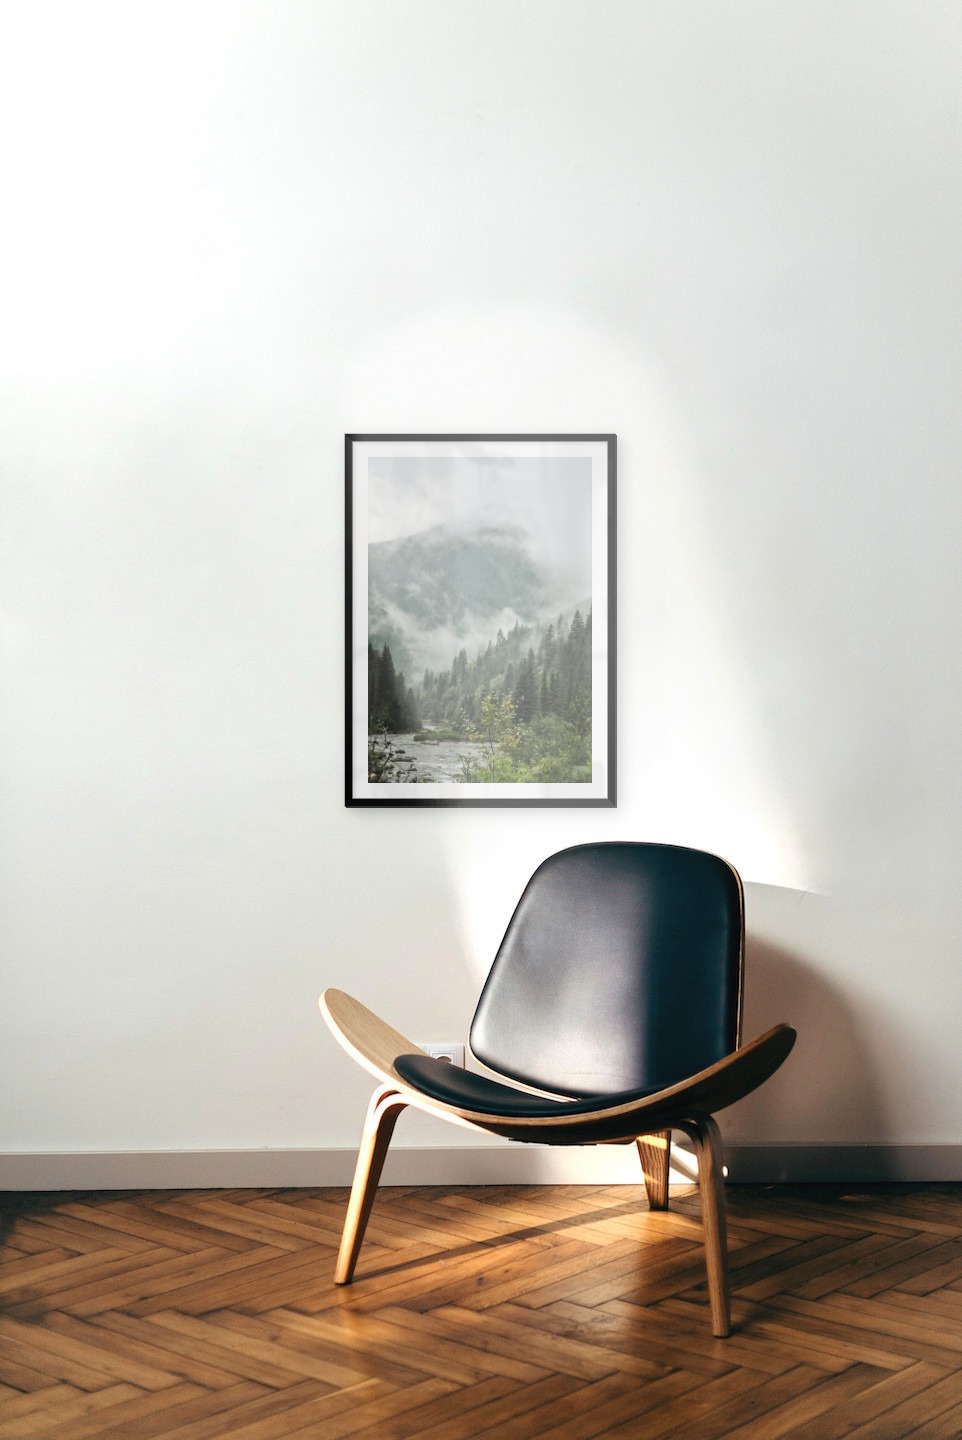 Gallery wall with picture frame in black in size 50x70 with print "River in front of mountains"